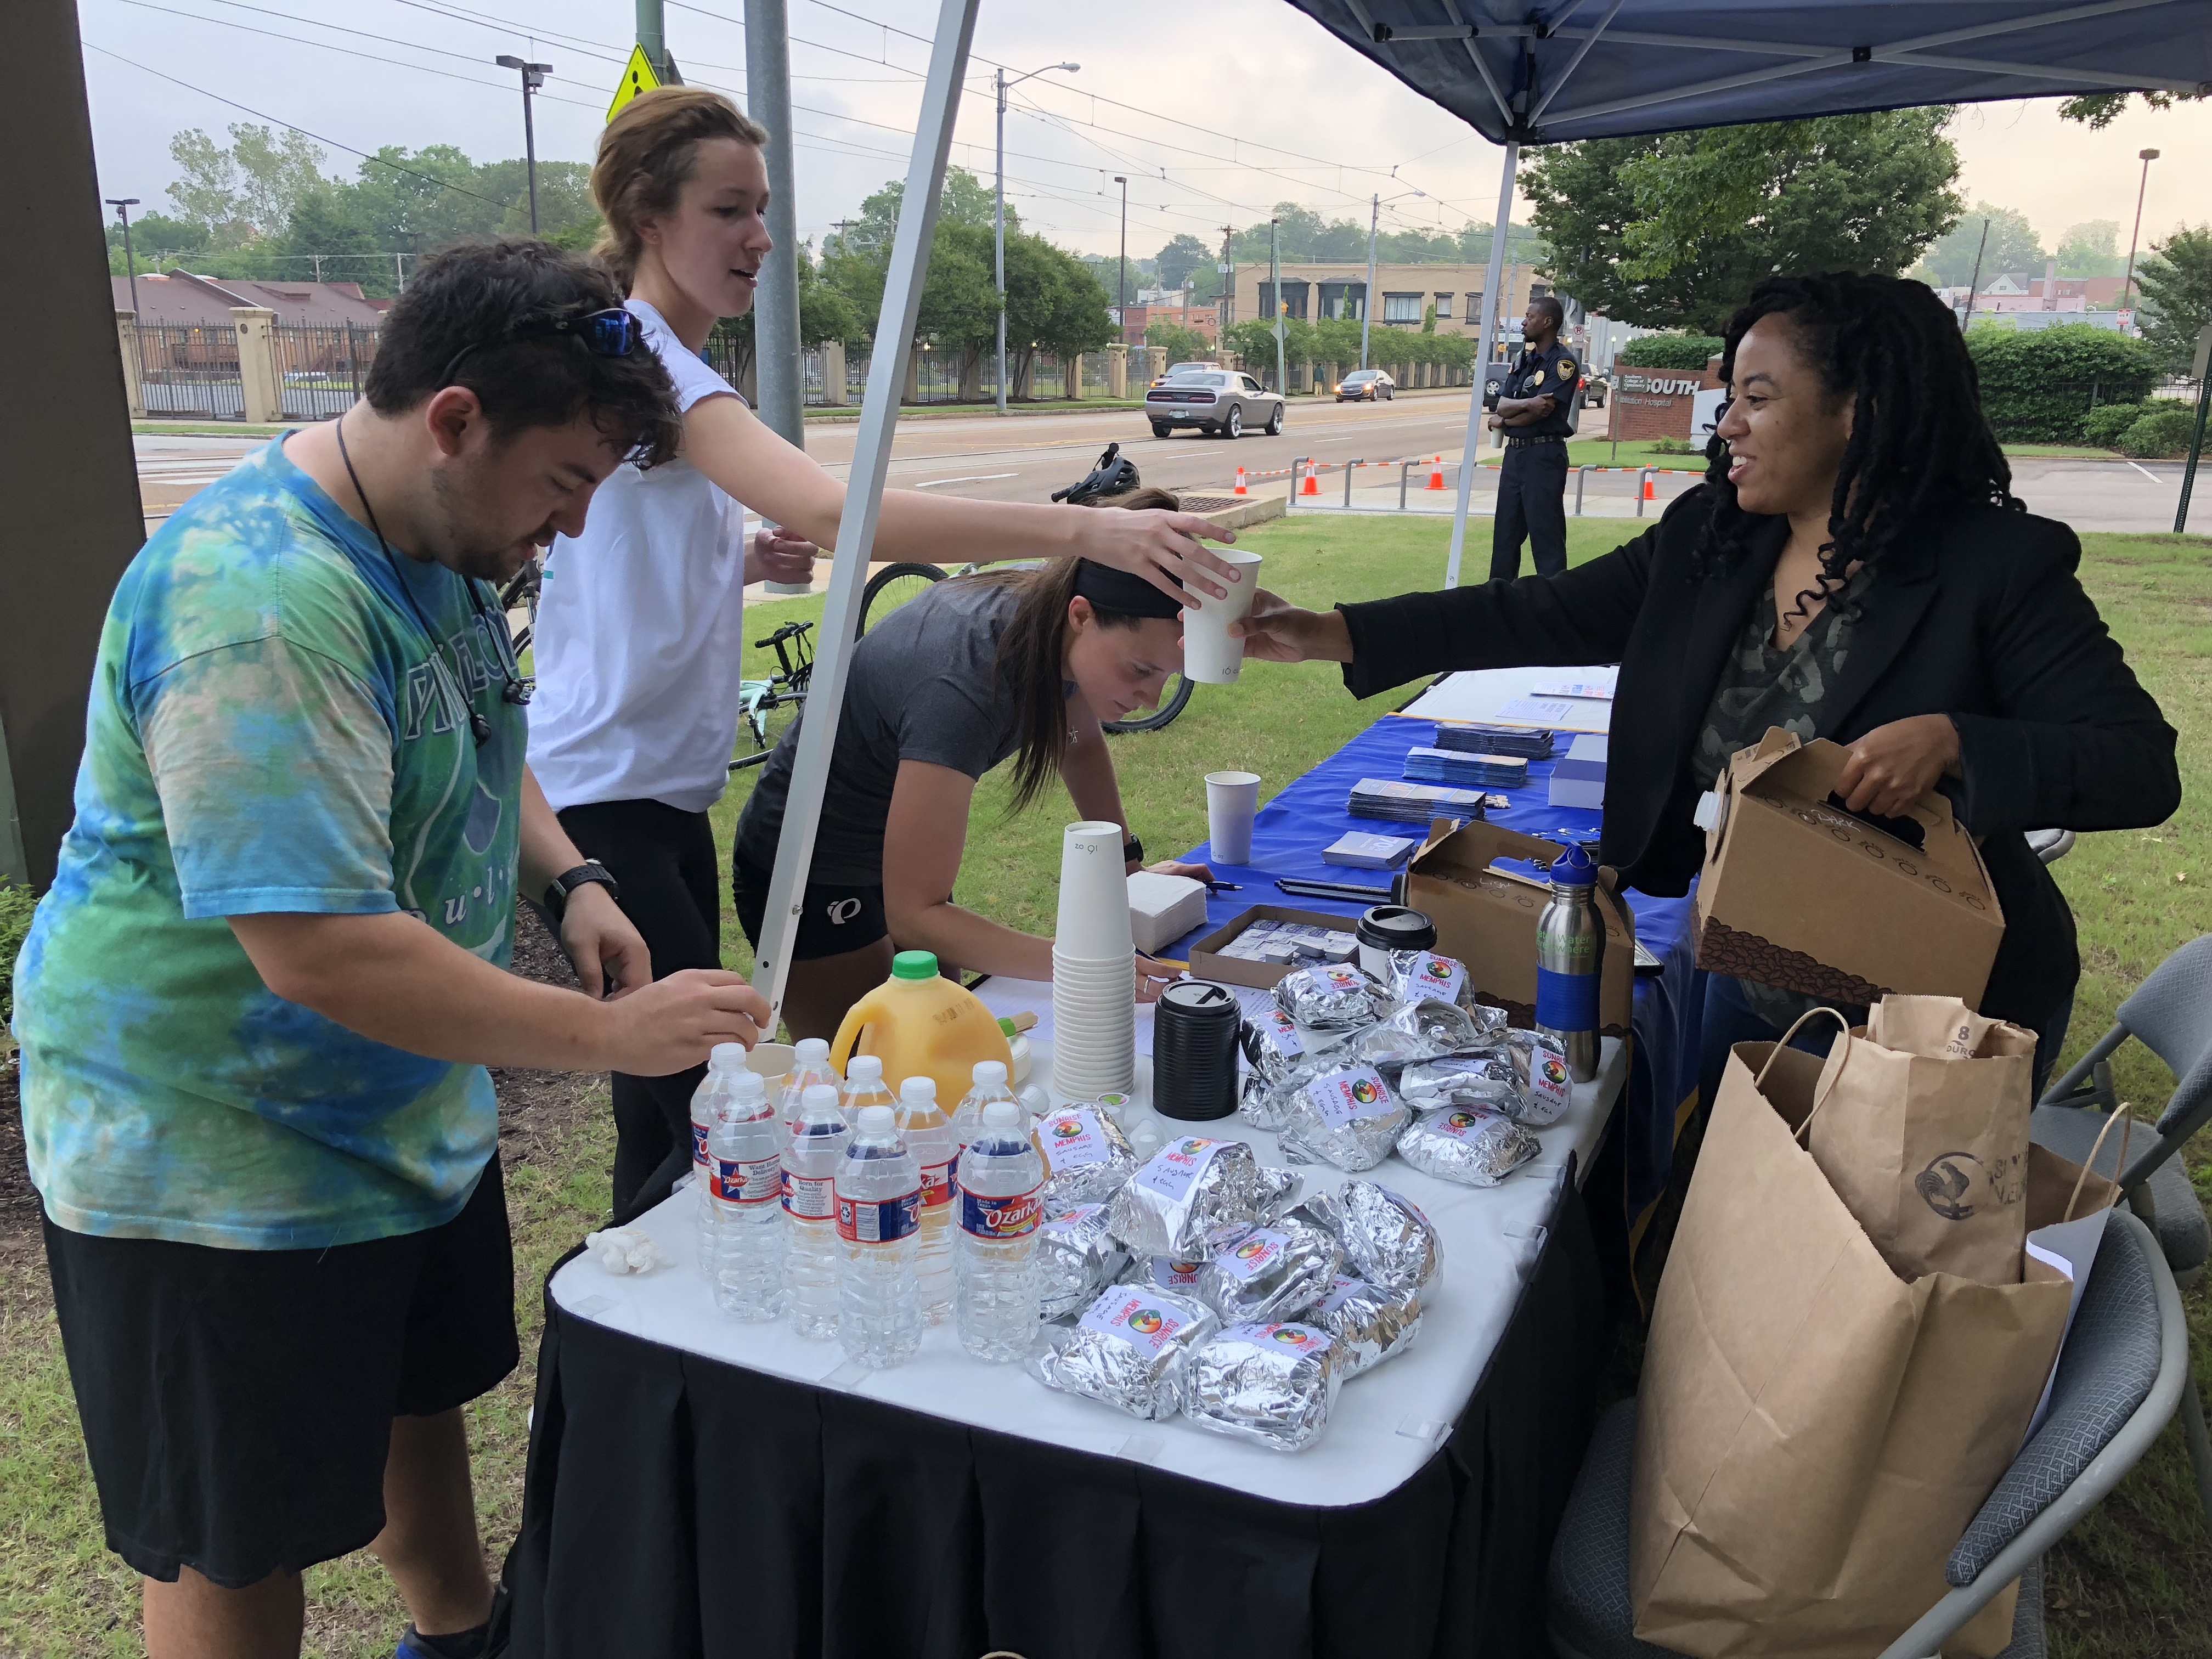 Students and faculty at the Southern College of Optometry participate in the 2018 Bike to Work Day, which included food and festivities at an outdoor registration table. (Submitted)